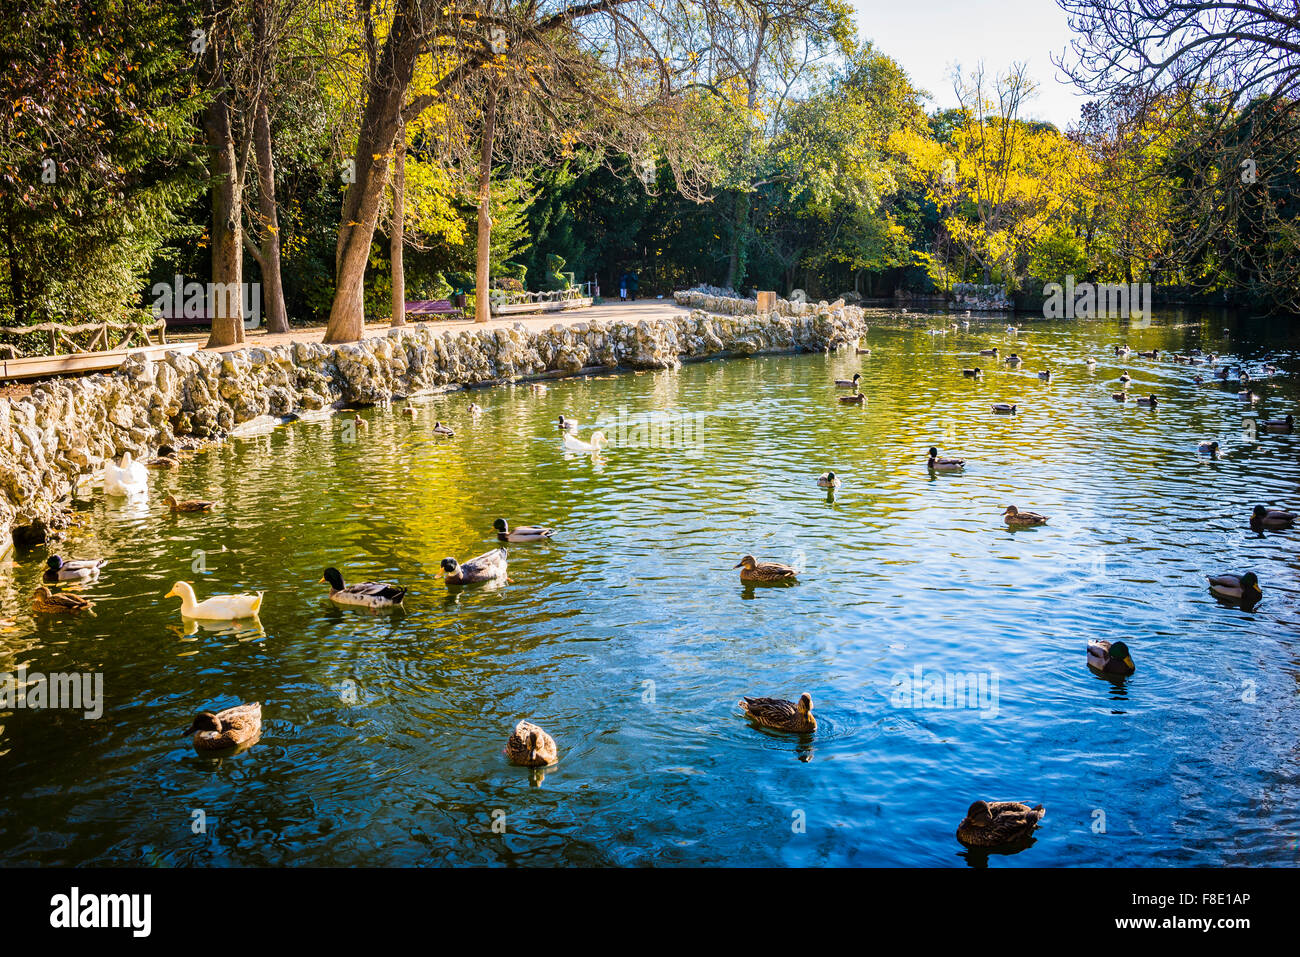 The pond. The 'Campo Grande' is a large public park located in the heart of the city of Valladolid. Castile and Leon, Spain. Stock Photo